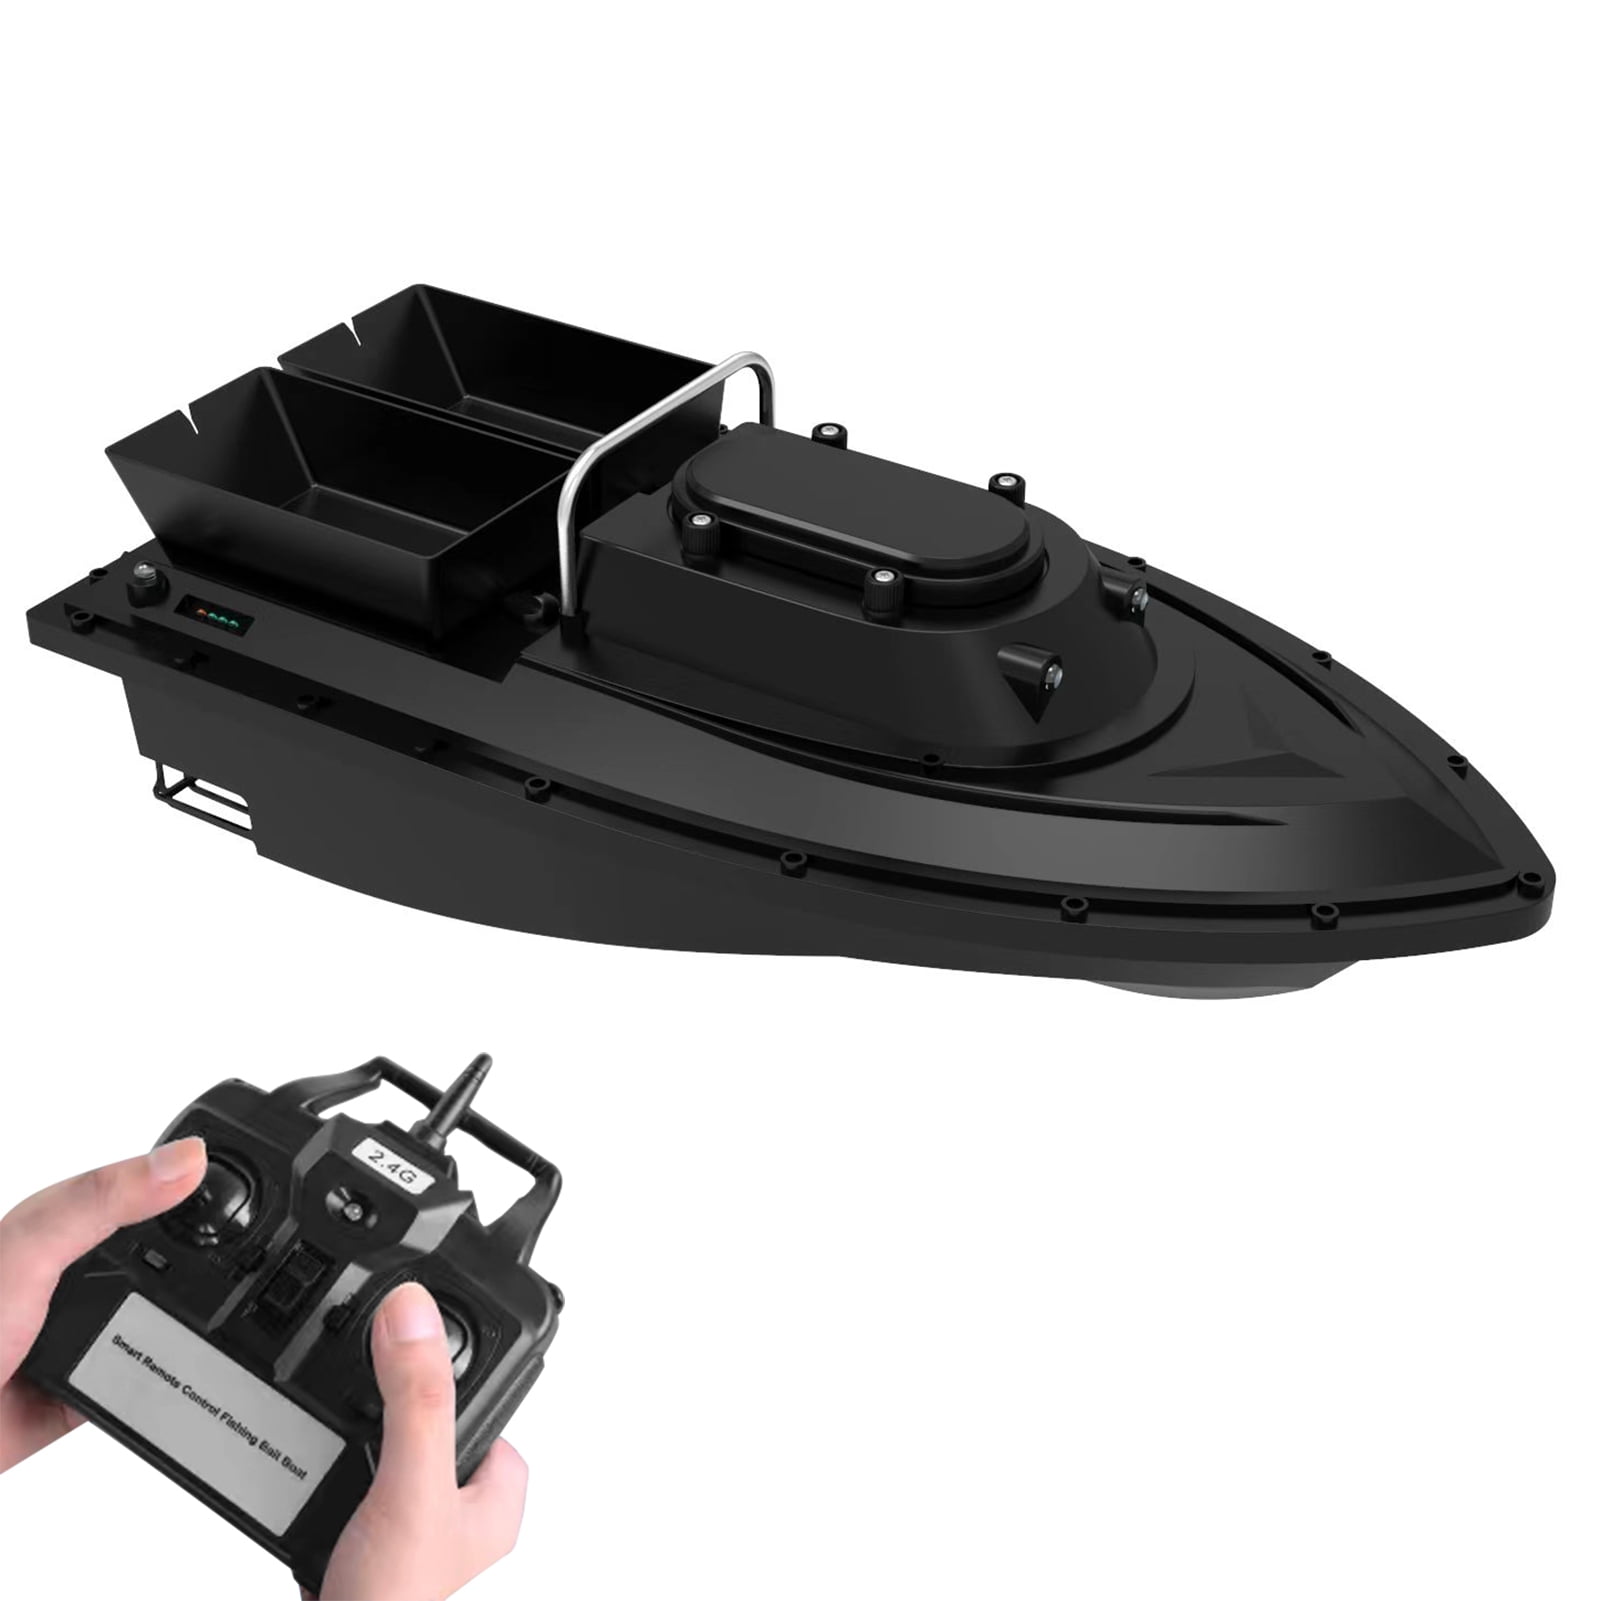 Smart RC Fishing Bait Boat 400-500M Wireless Remote Control Fishing Feeder  Boat Ship with LED Night Lights 